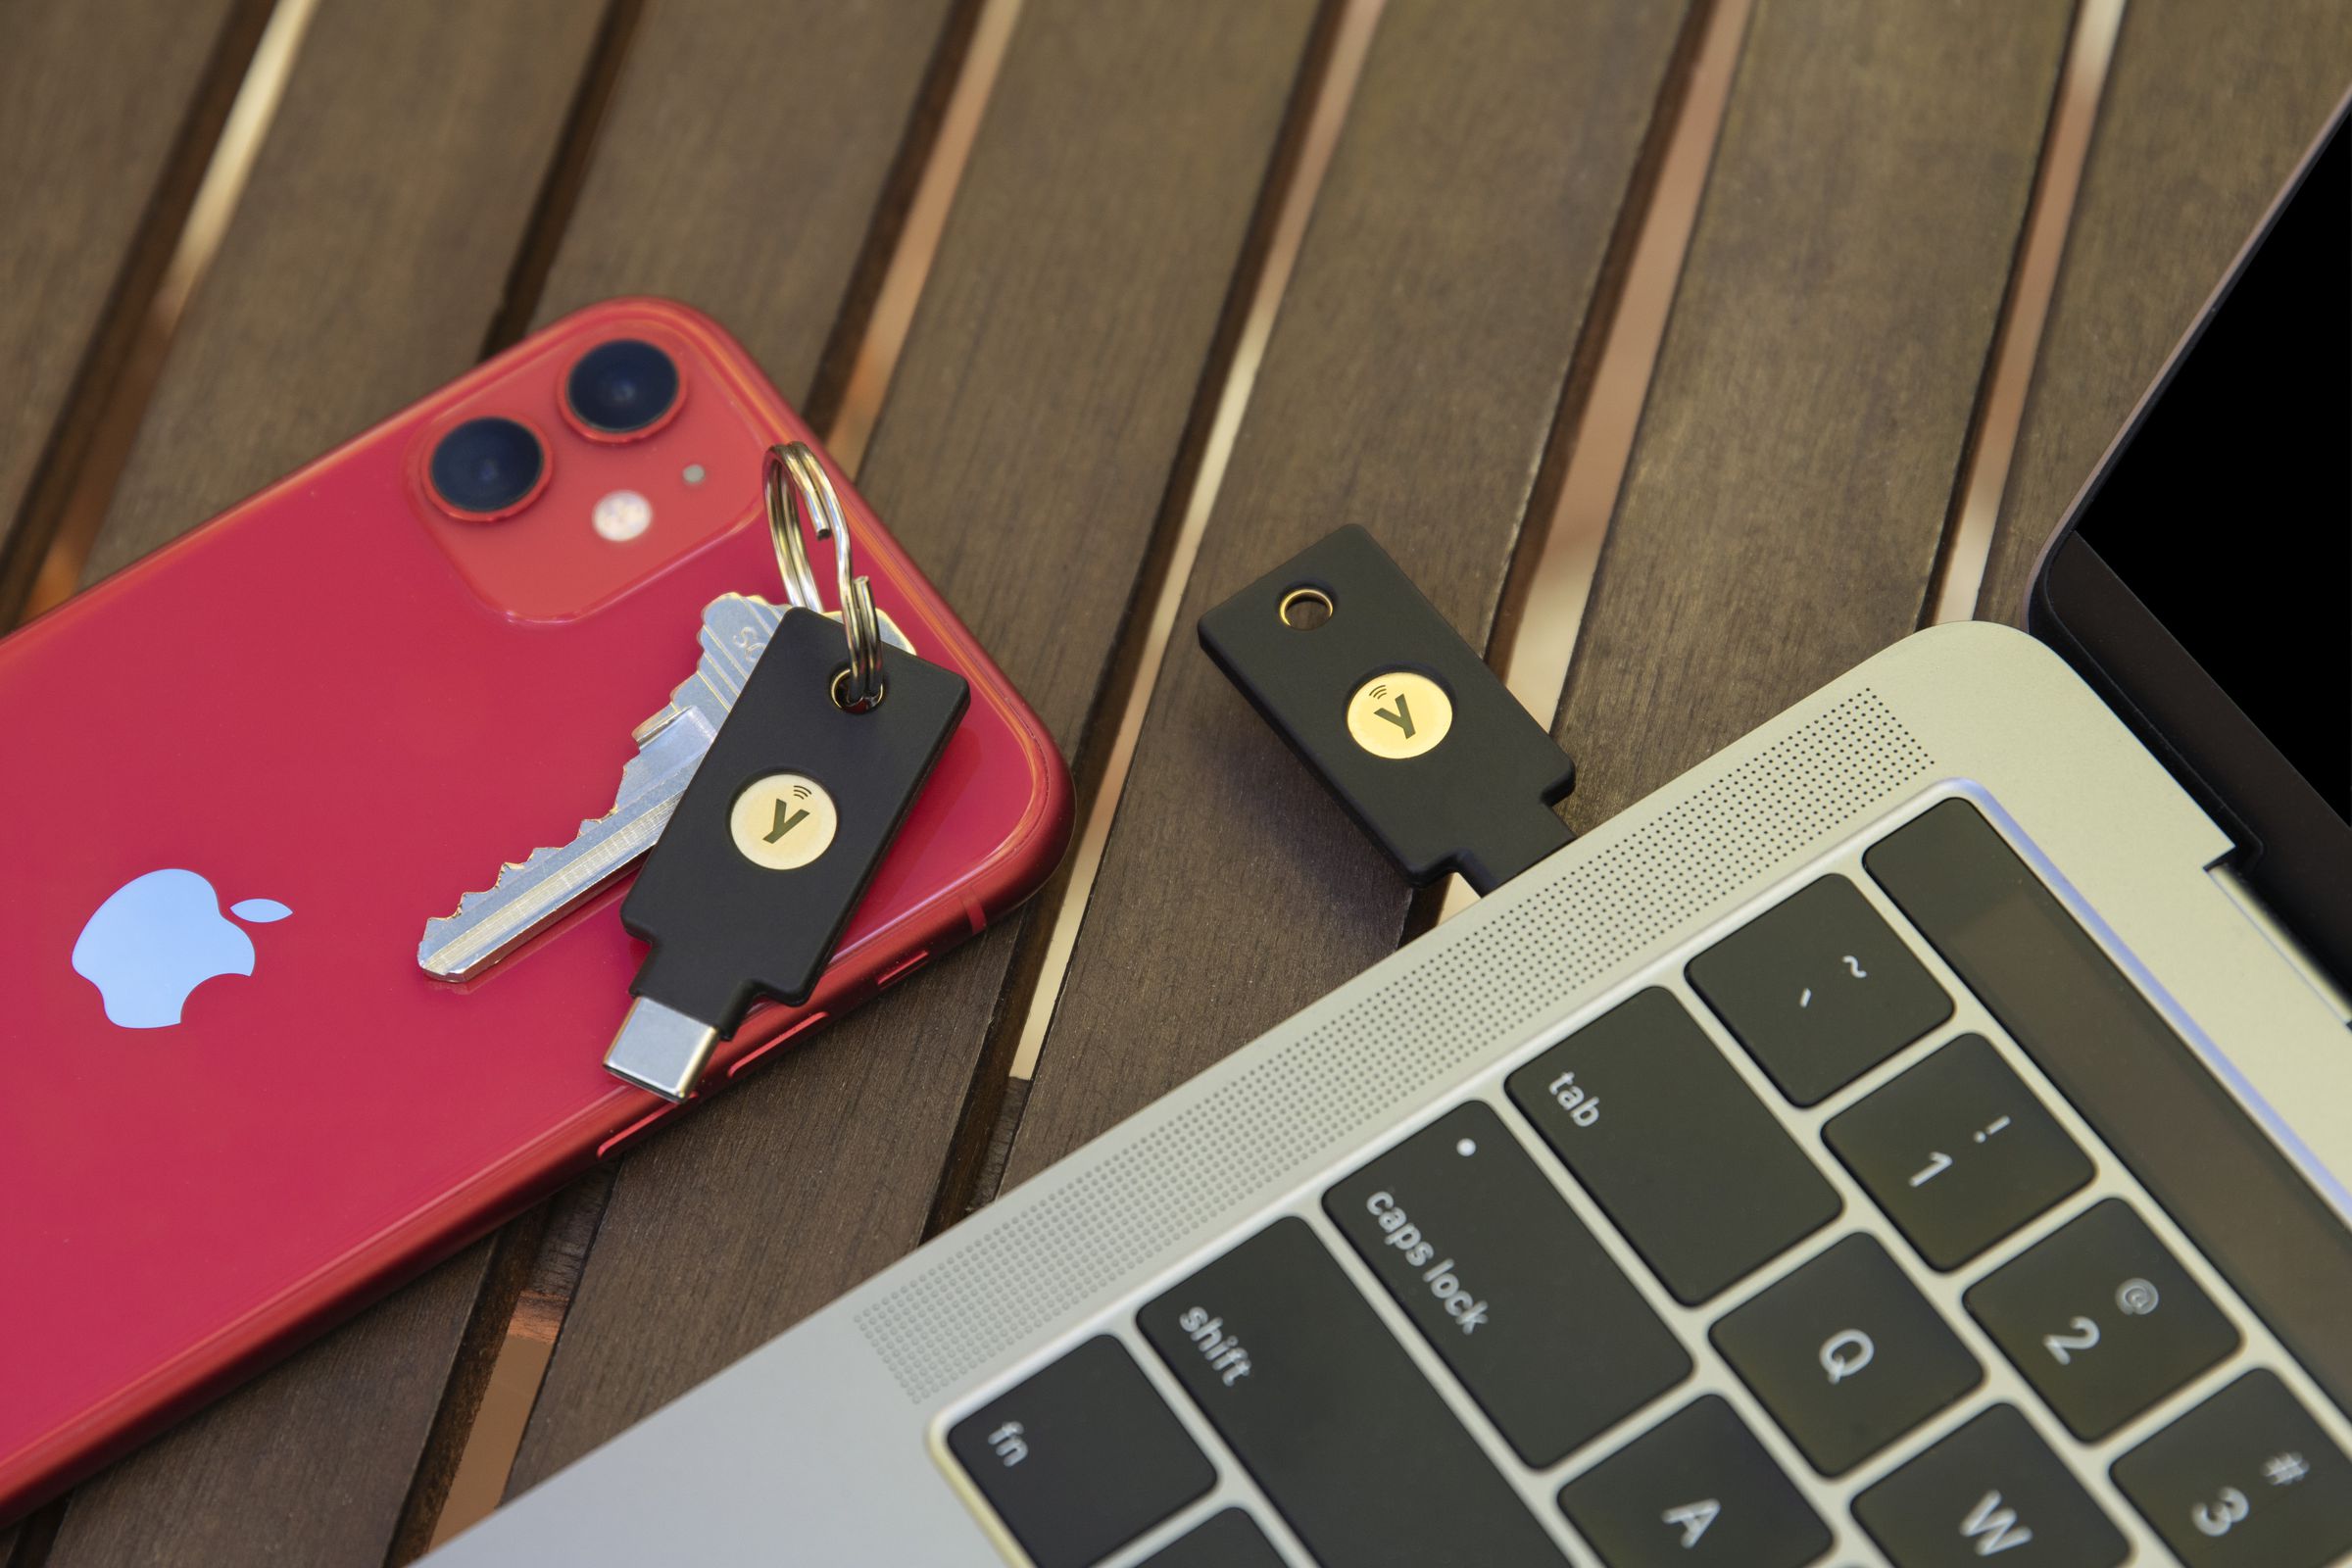 If you want to use a security key with your Apple account, you’ll need two keys